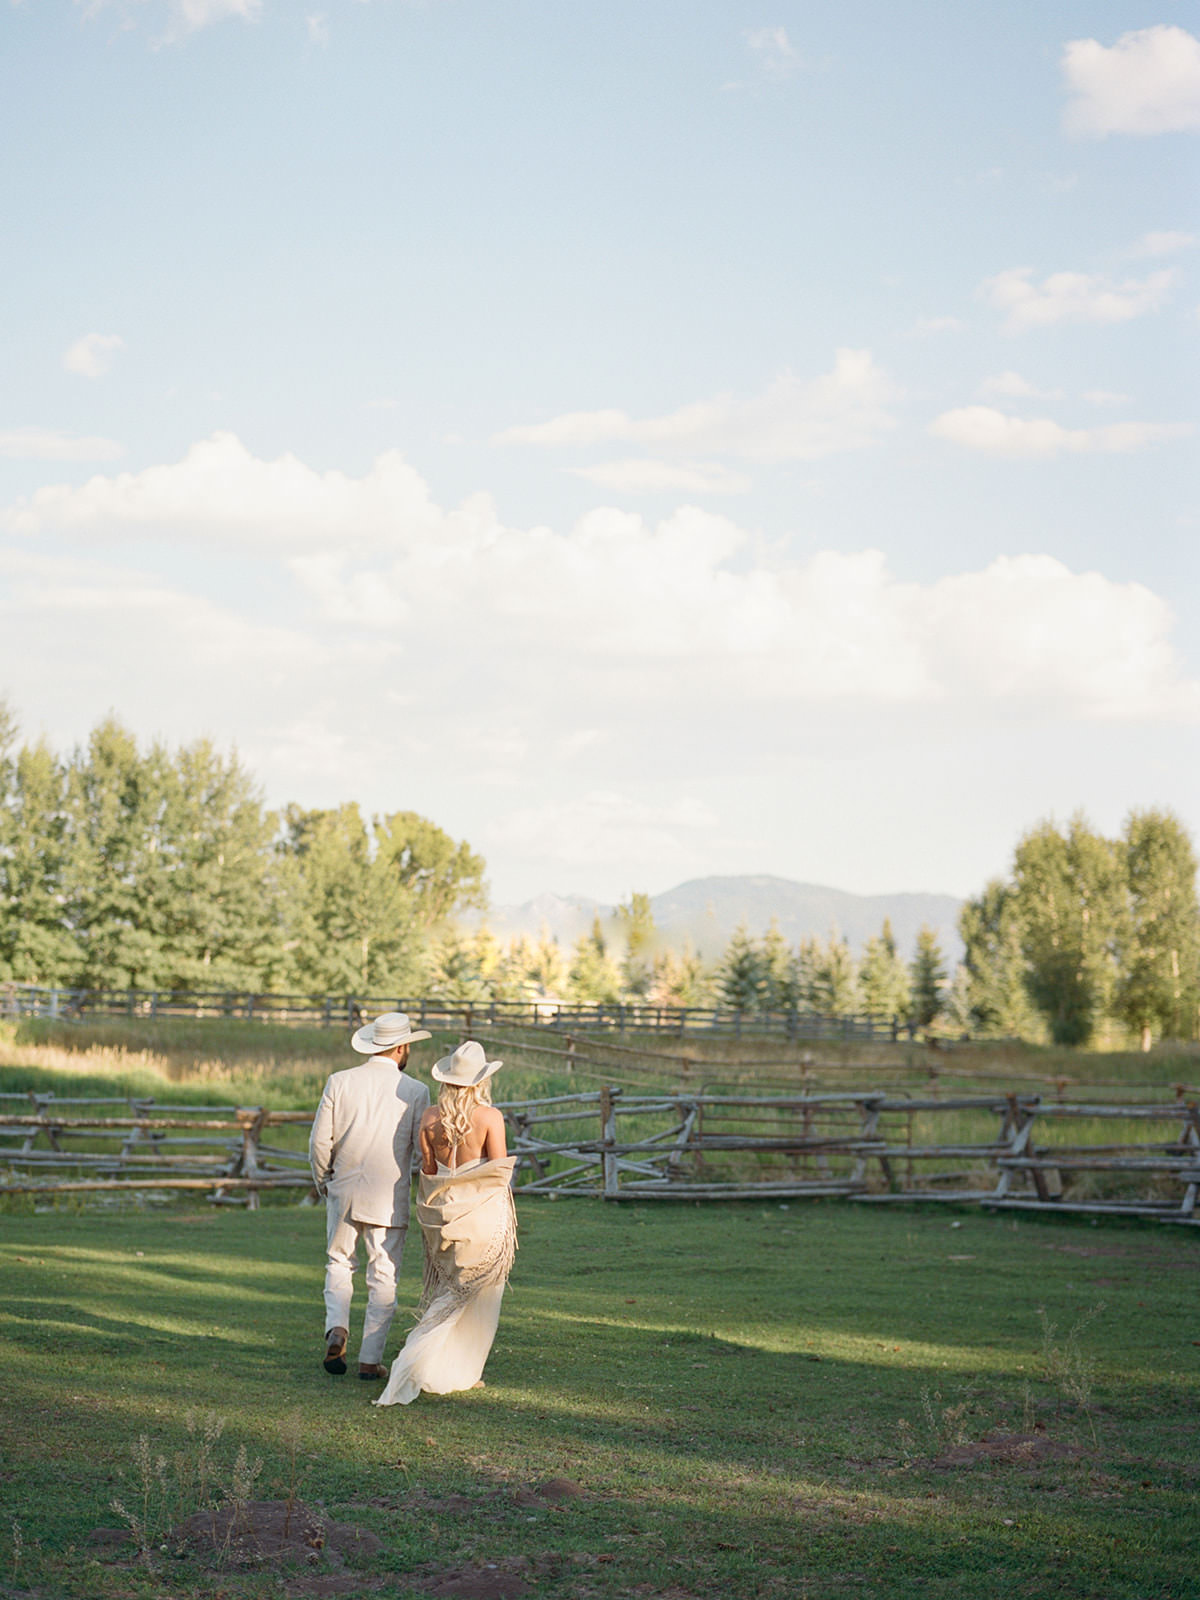 Jackson Hole Outdoor Wedding at Antelope Trails Ranch